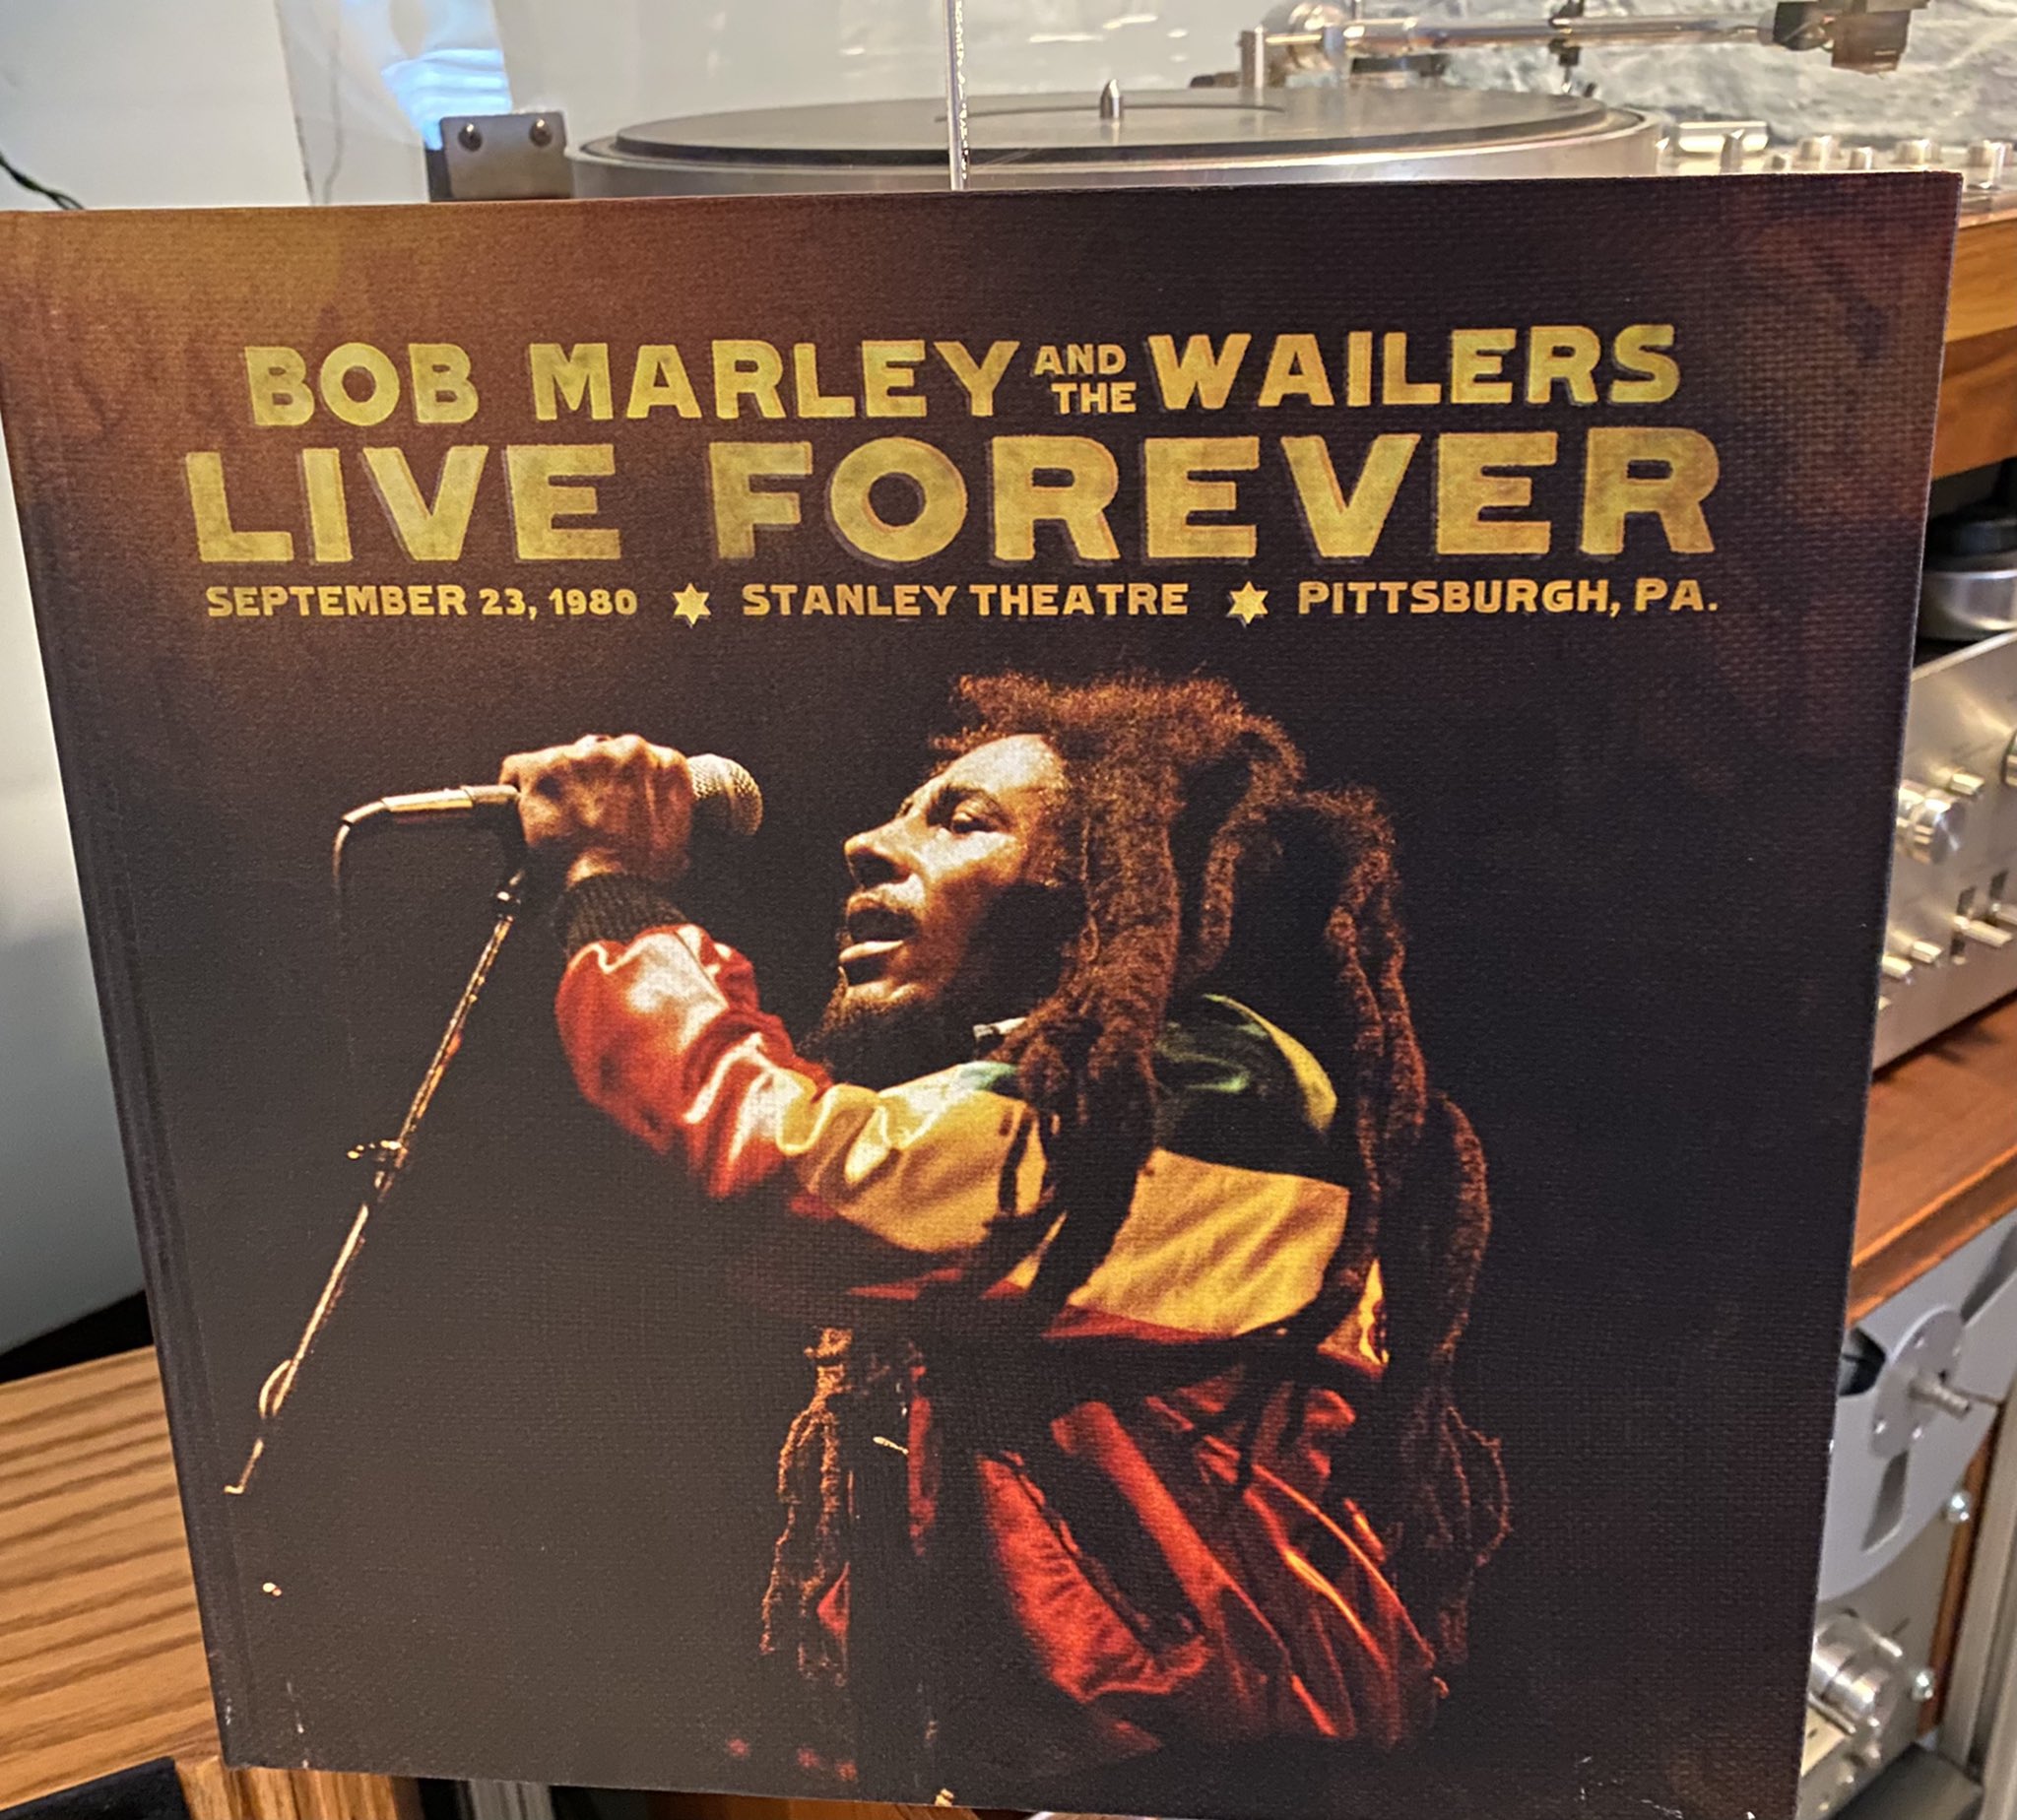 Now spinning at Skylab:

Bob Marley & The Wailers - Live Forever Happy 76th birthday !!! 